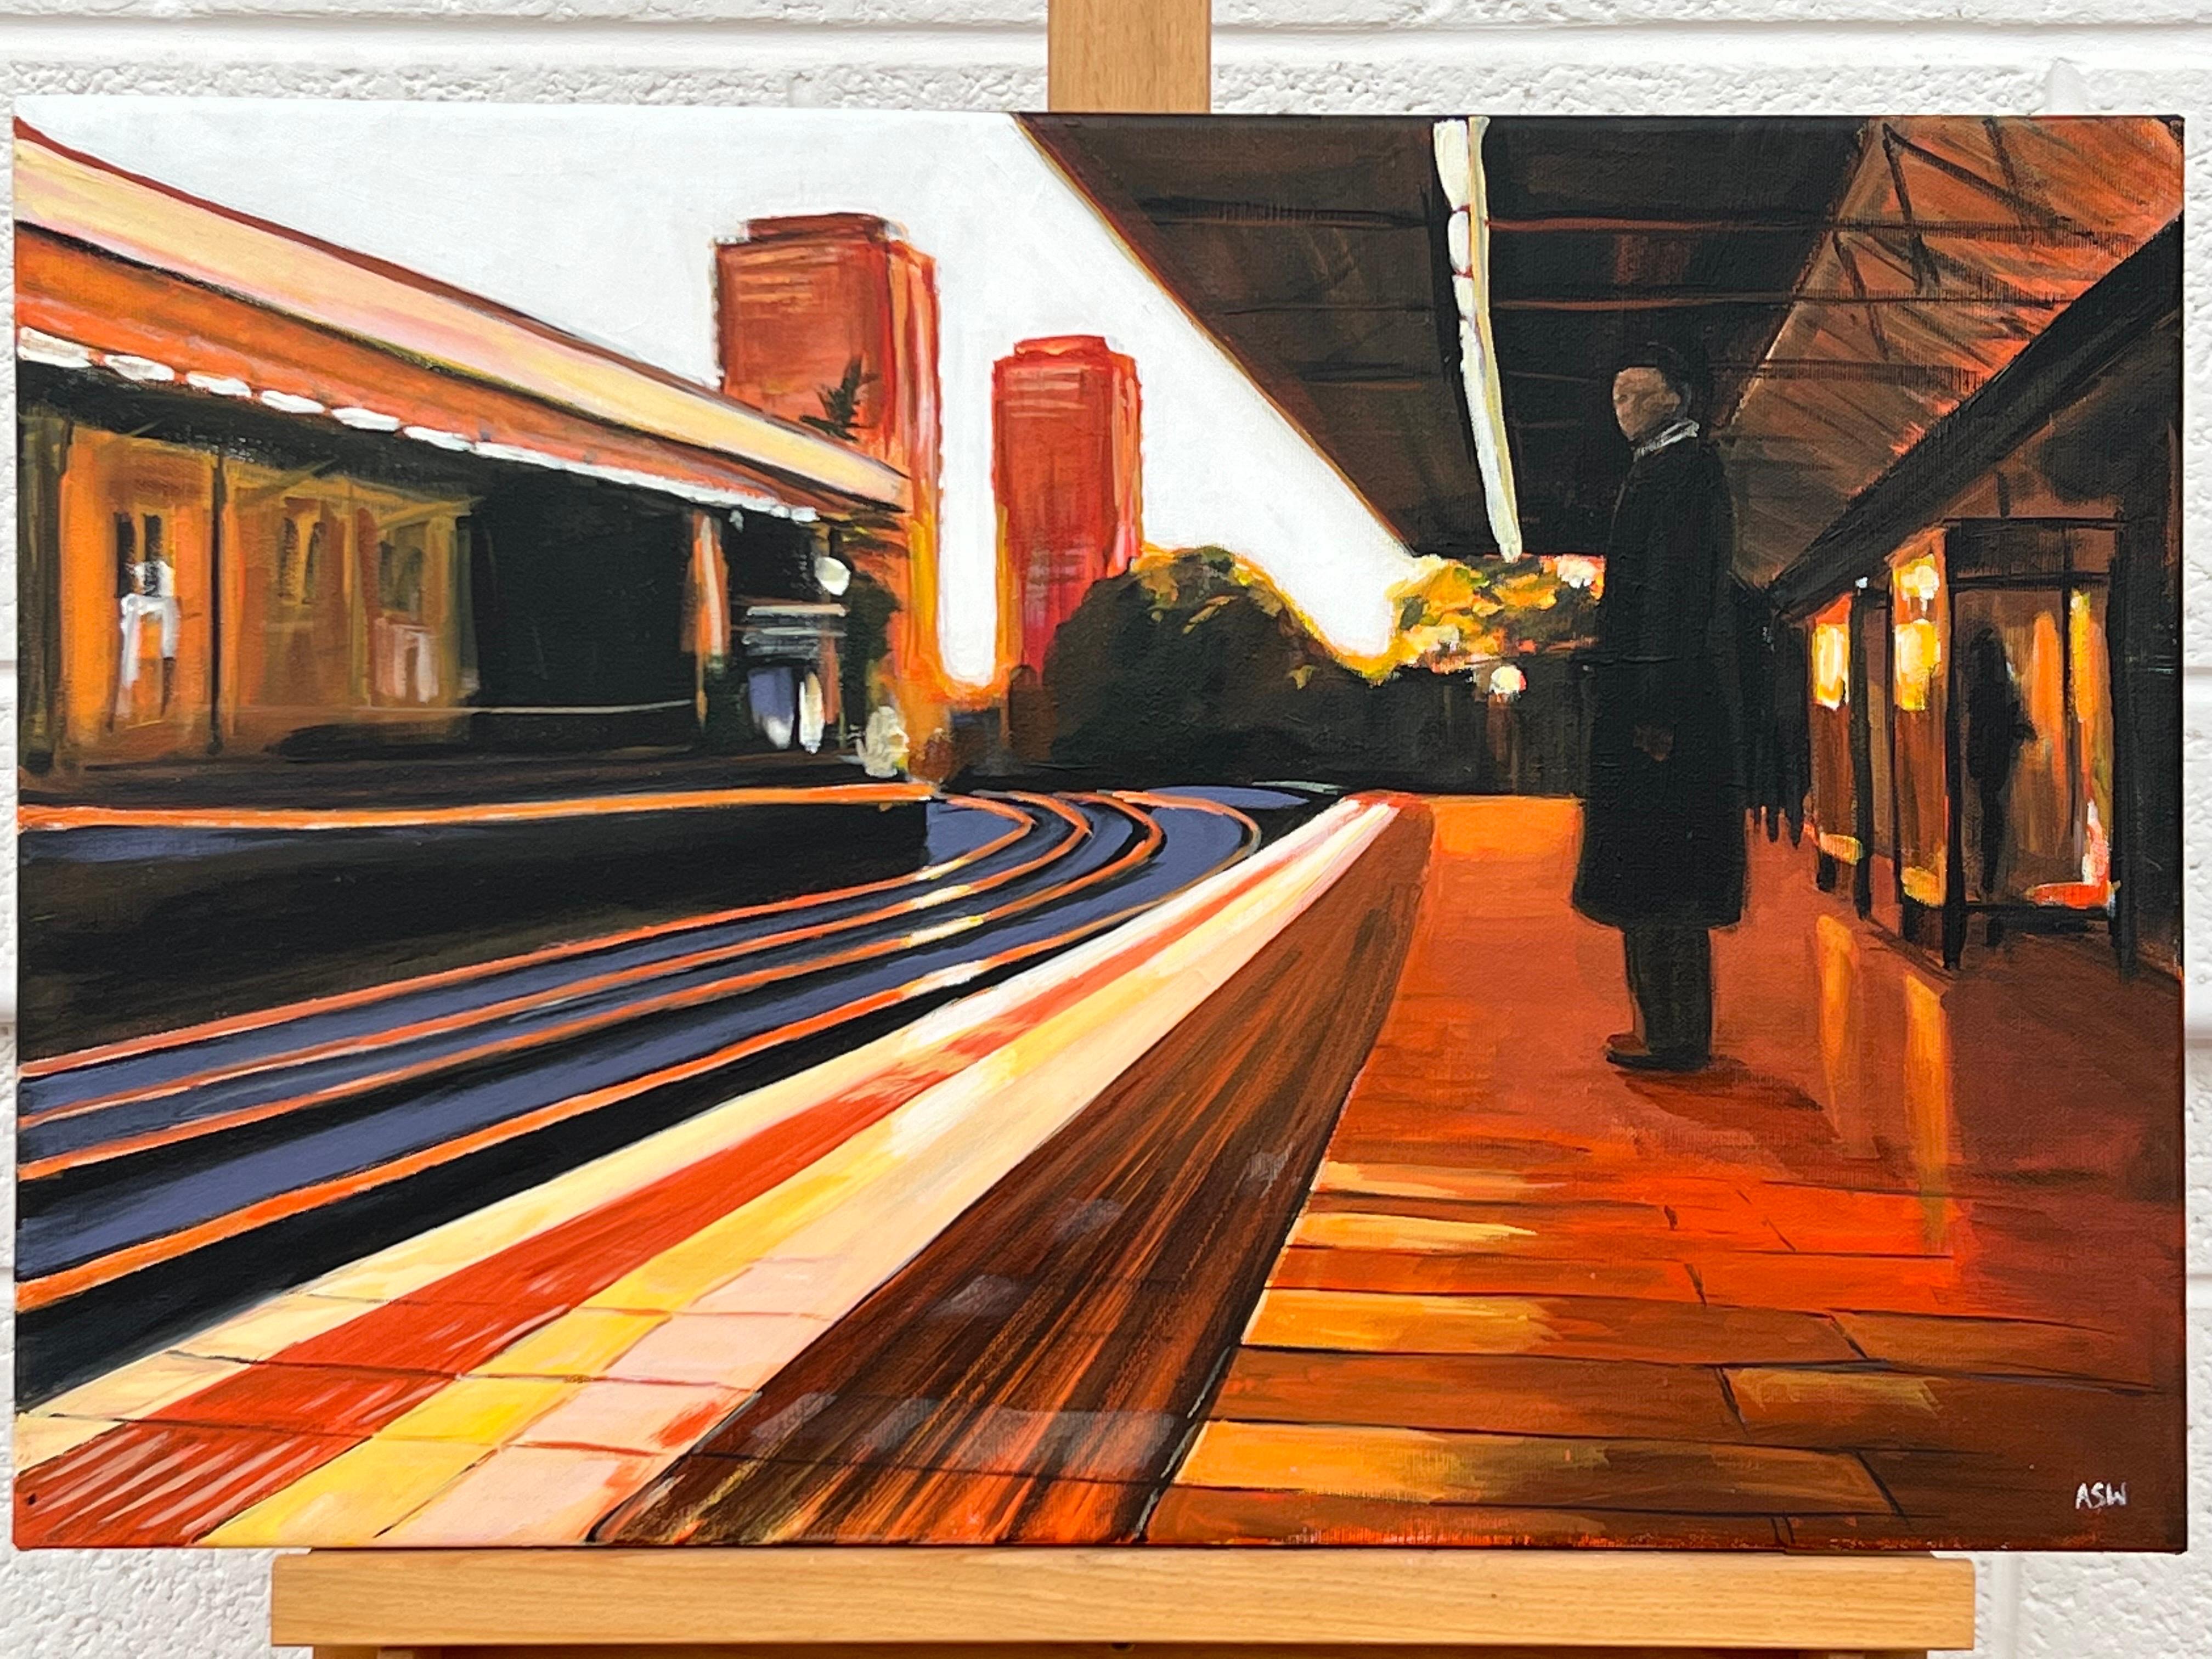 Painting of Train Station in London England by Leading Contemporary British Urban Landscape Artist, Angela Wakefield. This original depicts a sole figure standing in an empty station, in Westbourne Park, London, using a limited palette of oranges